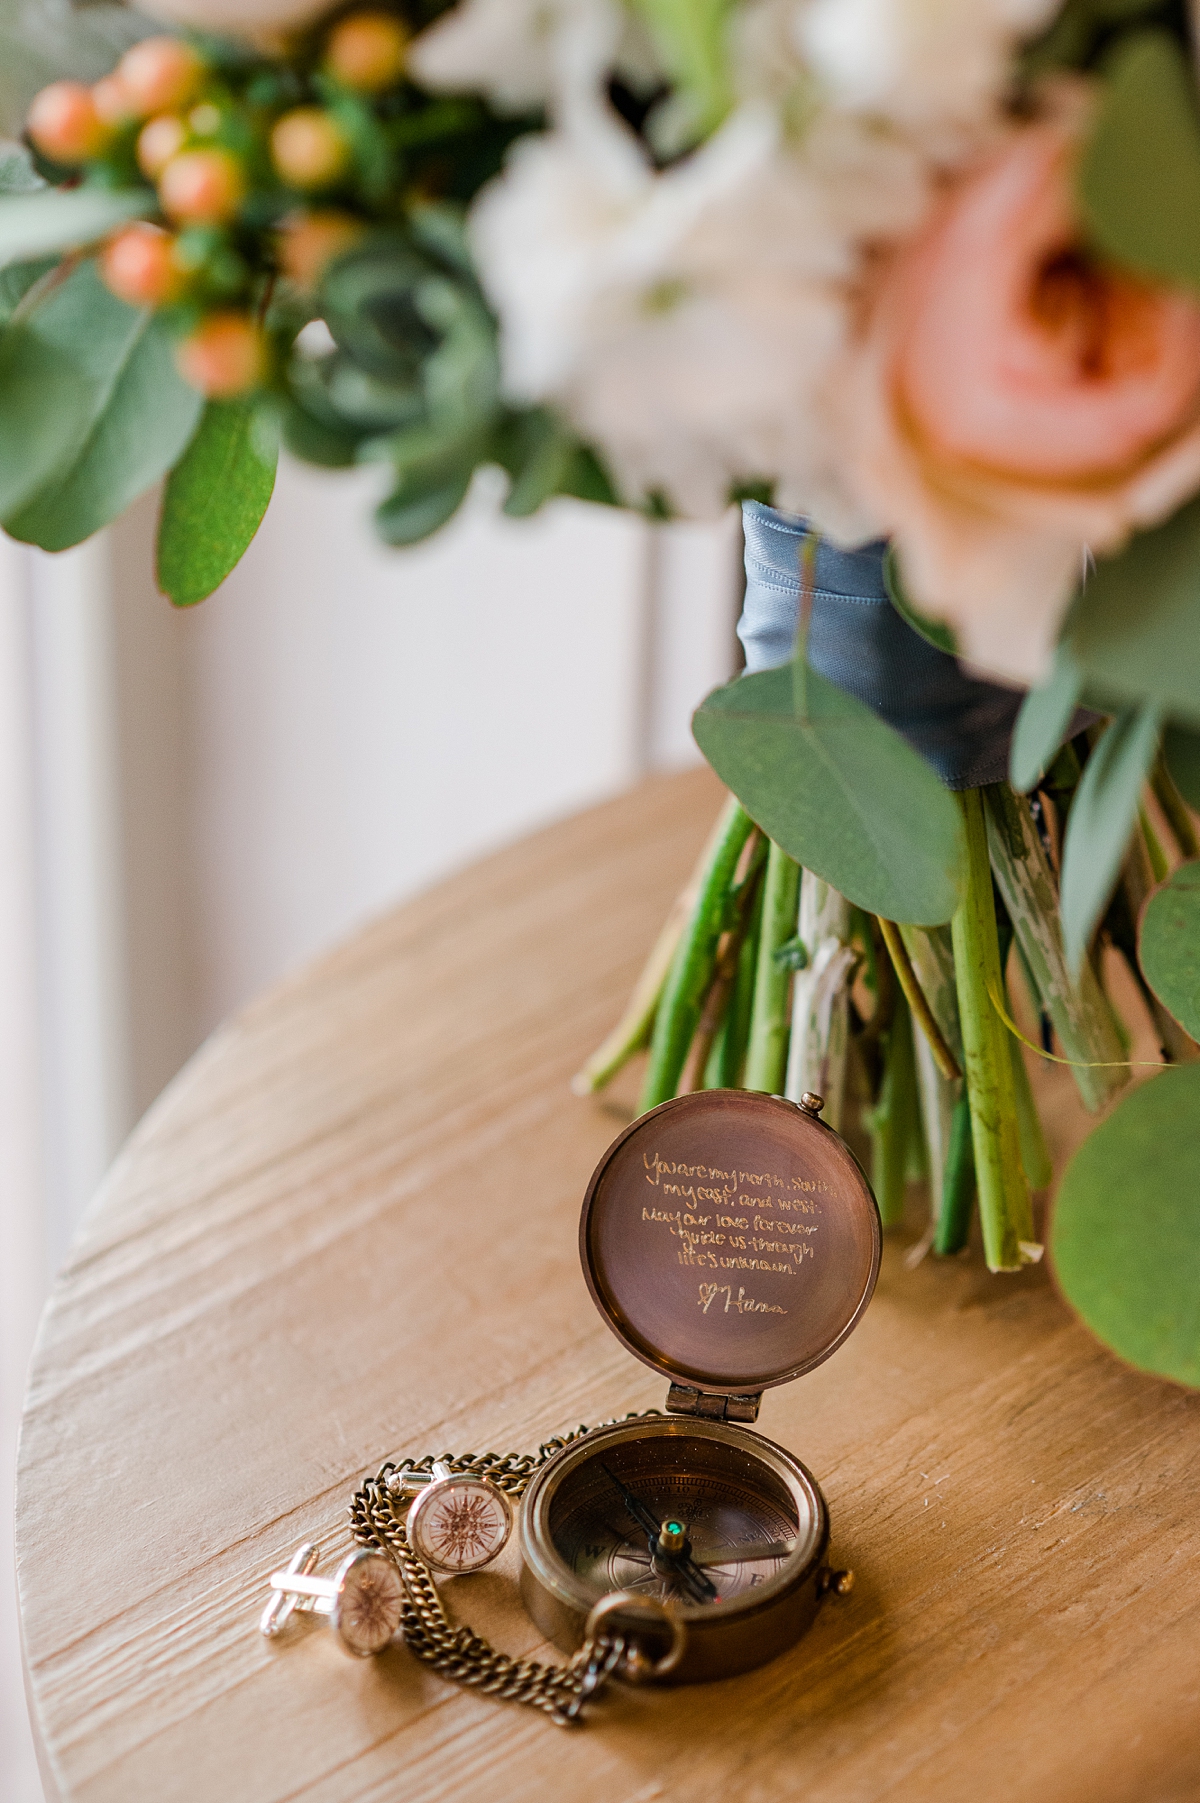 Compass Gift for Groom Bridal Details at a Magnolia Venue Summer Mountain Wedding in Tennessee. Wedding Photography by Virginia Wedding Photographer Kailey Brianne Photography. 